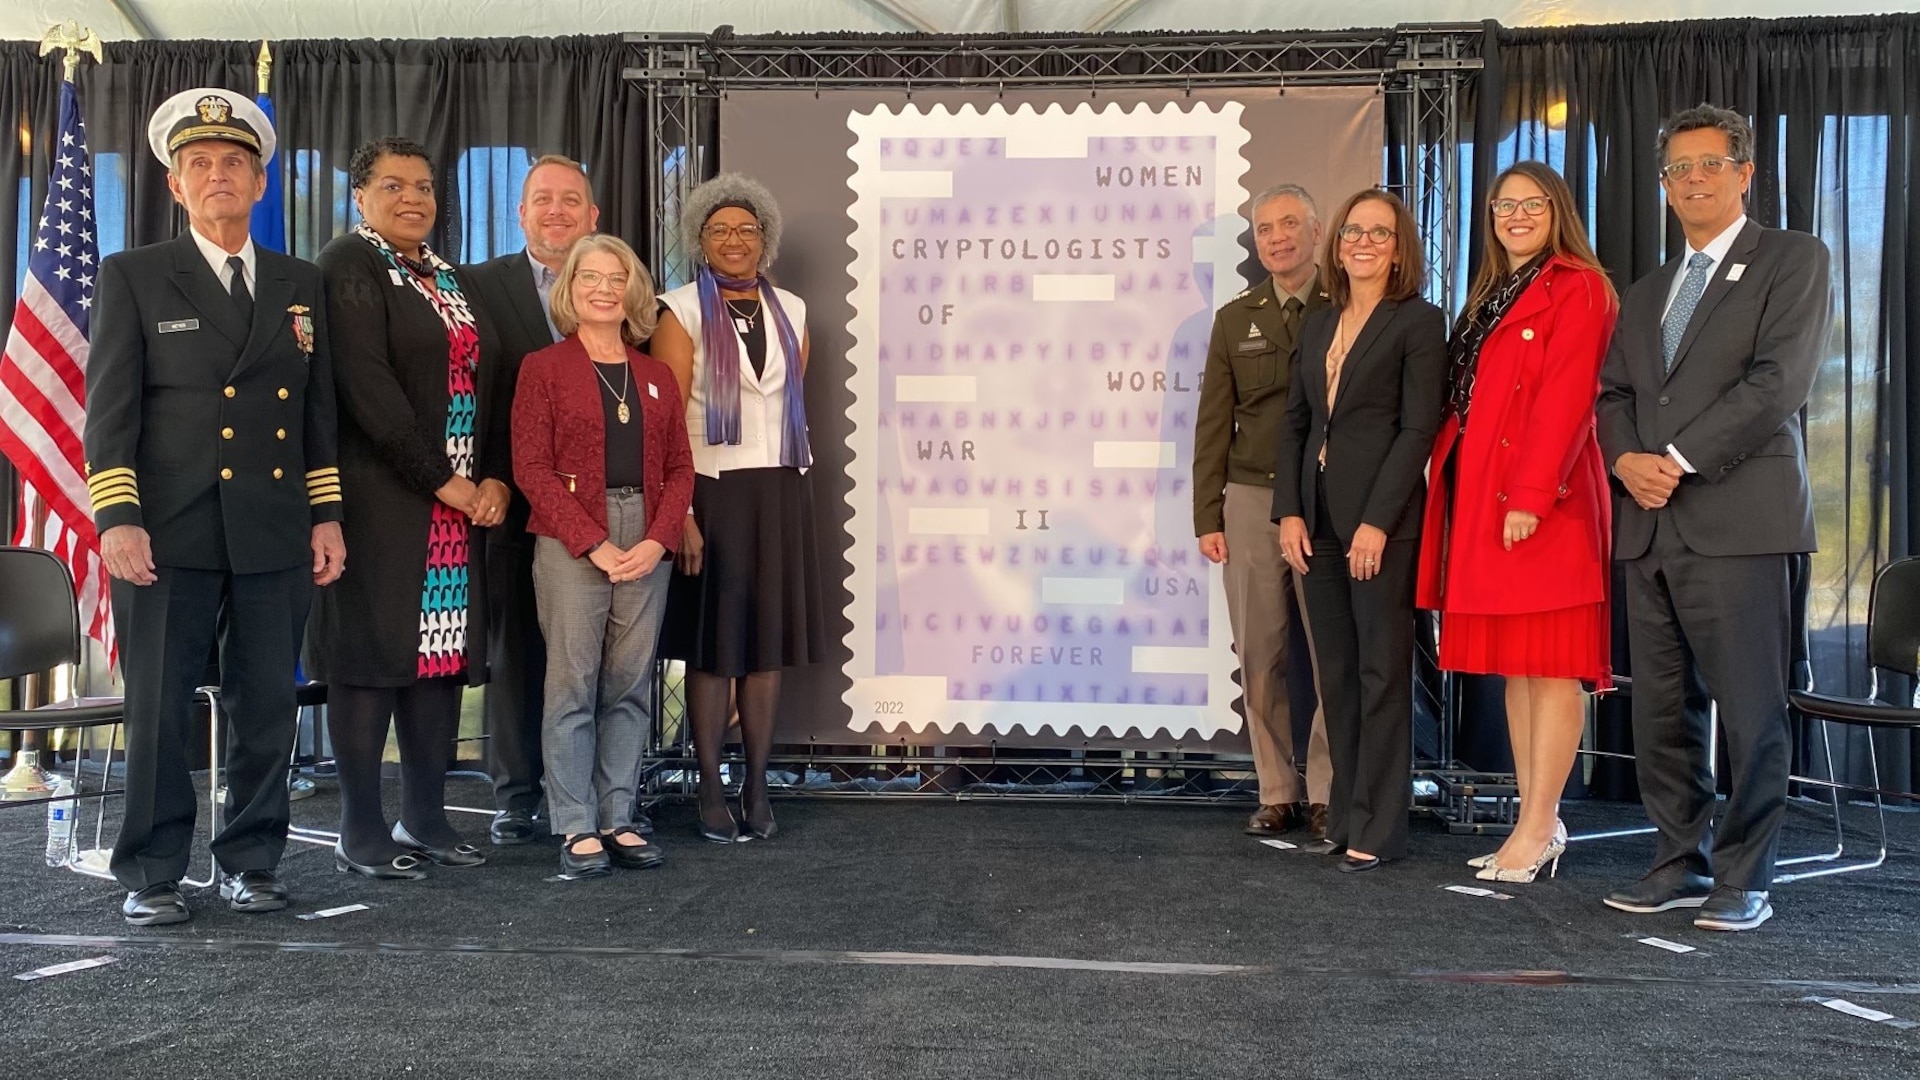 The first-day-of-issue ceremony for the Women Cryptologists of World War II Forever stamp on October 18, 2022 at the National Cryptologic Museum.